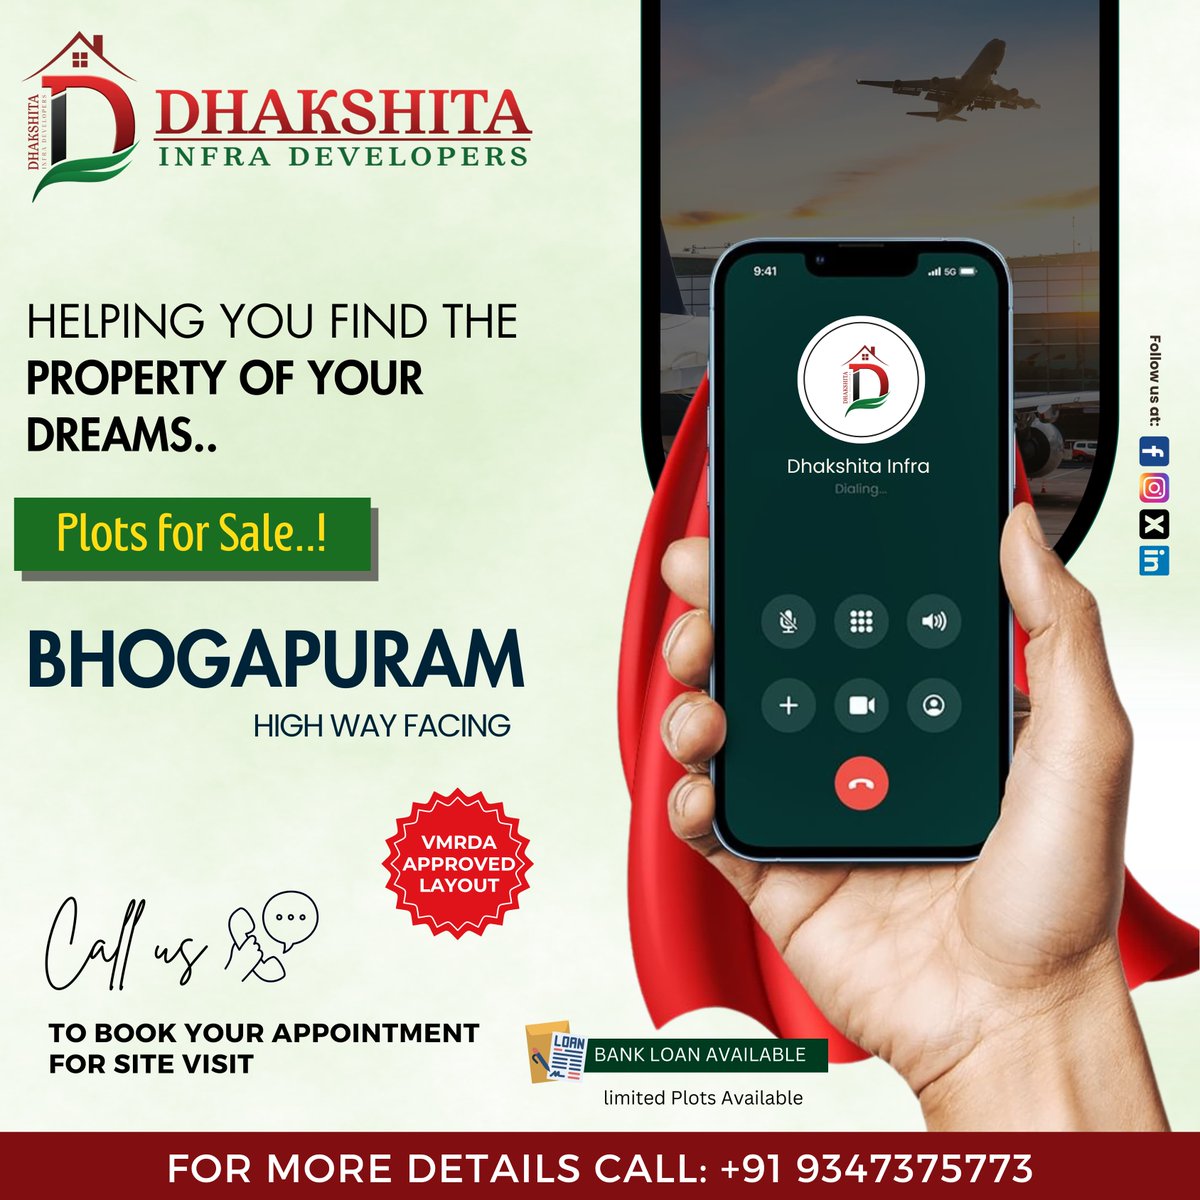 Unlocking your dream lifestyle with Property Of Your Dreams Plots for Sale, brought to you by Dhakshitha Infra Developers. 

More information: +91 9347375773

#DhakshitaInfra #PrimeLocation #BestRealEstateAgency #BestPlotsInVizag #Readytobuildplots #DreamHome #InvestInYourFuture